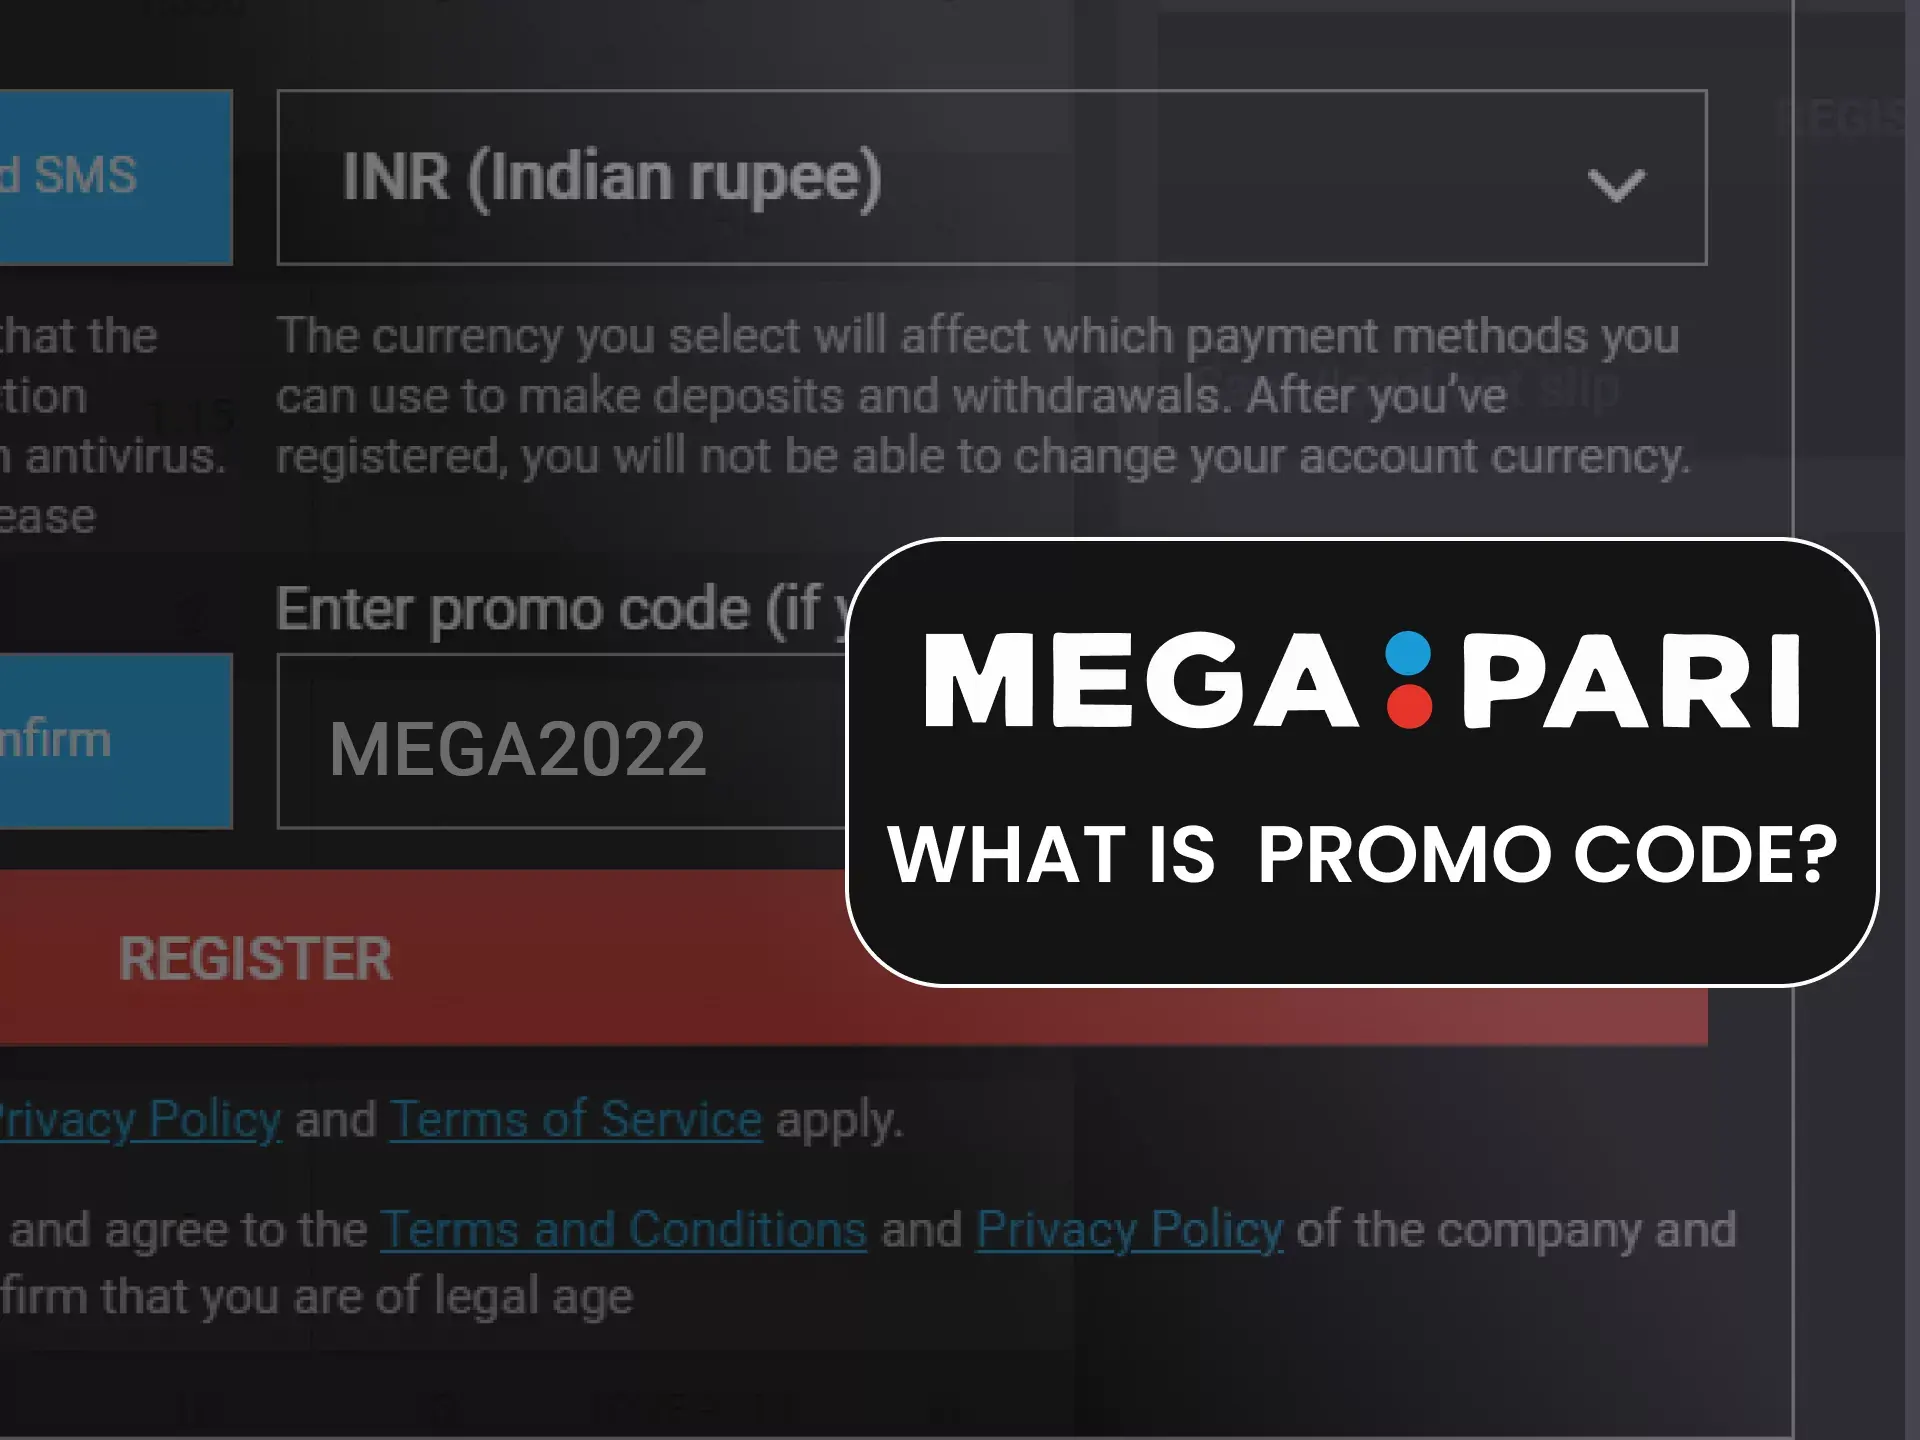 Find out what the Megapari promo code means.